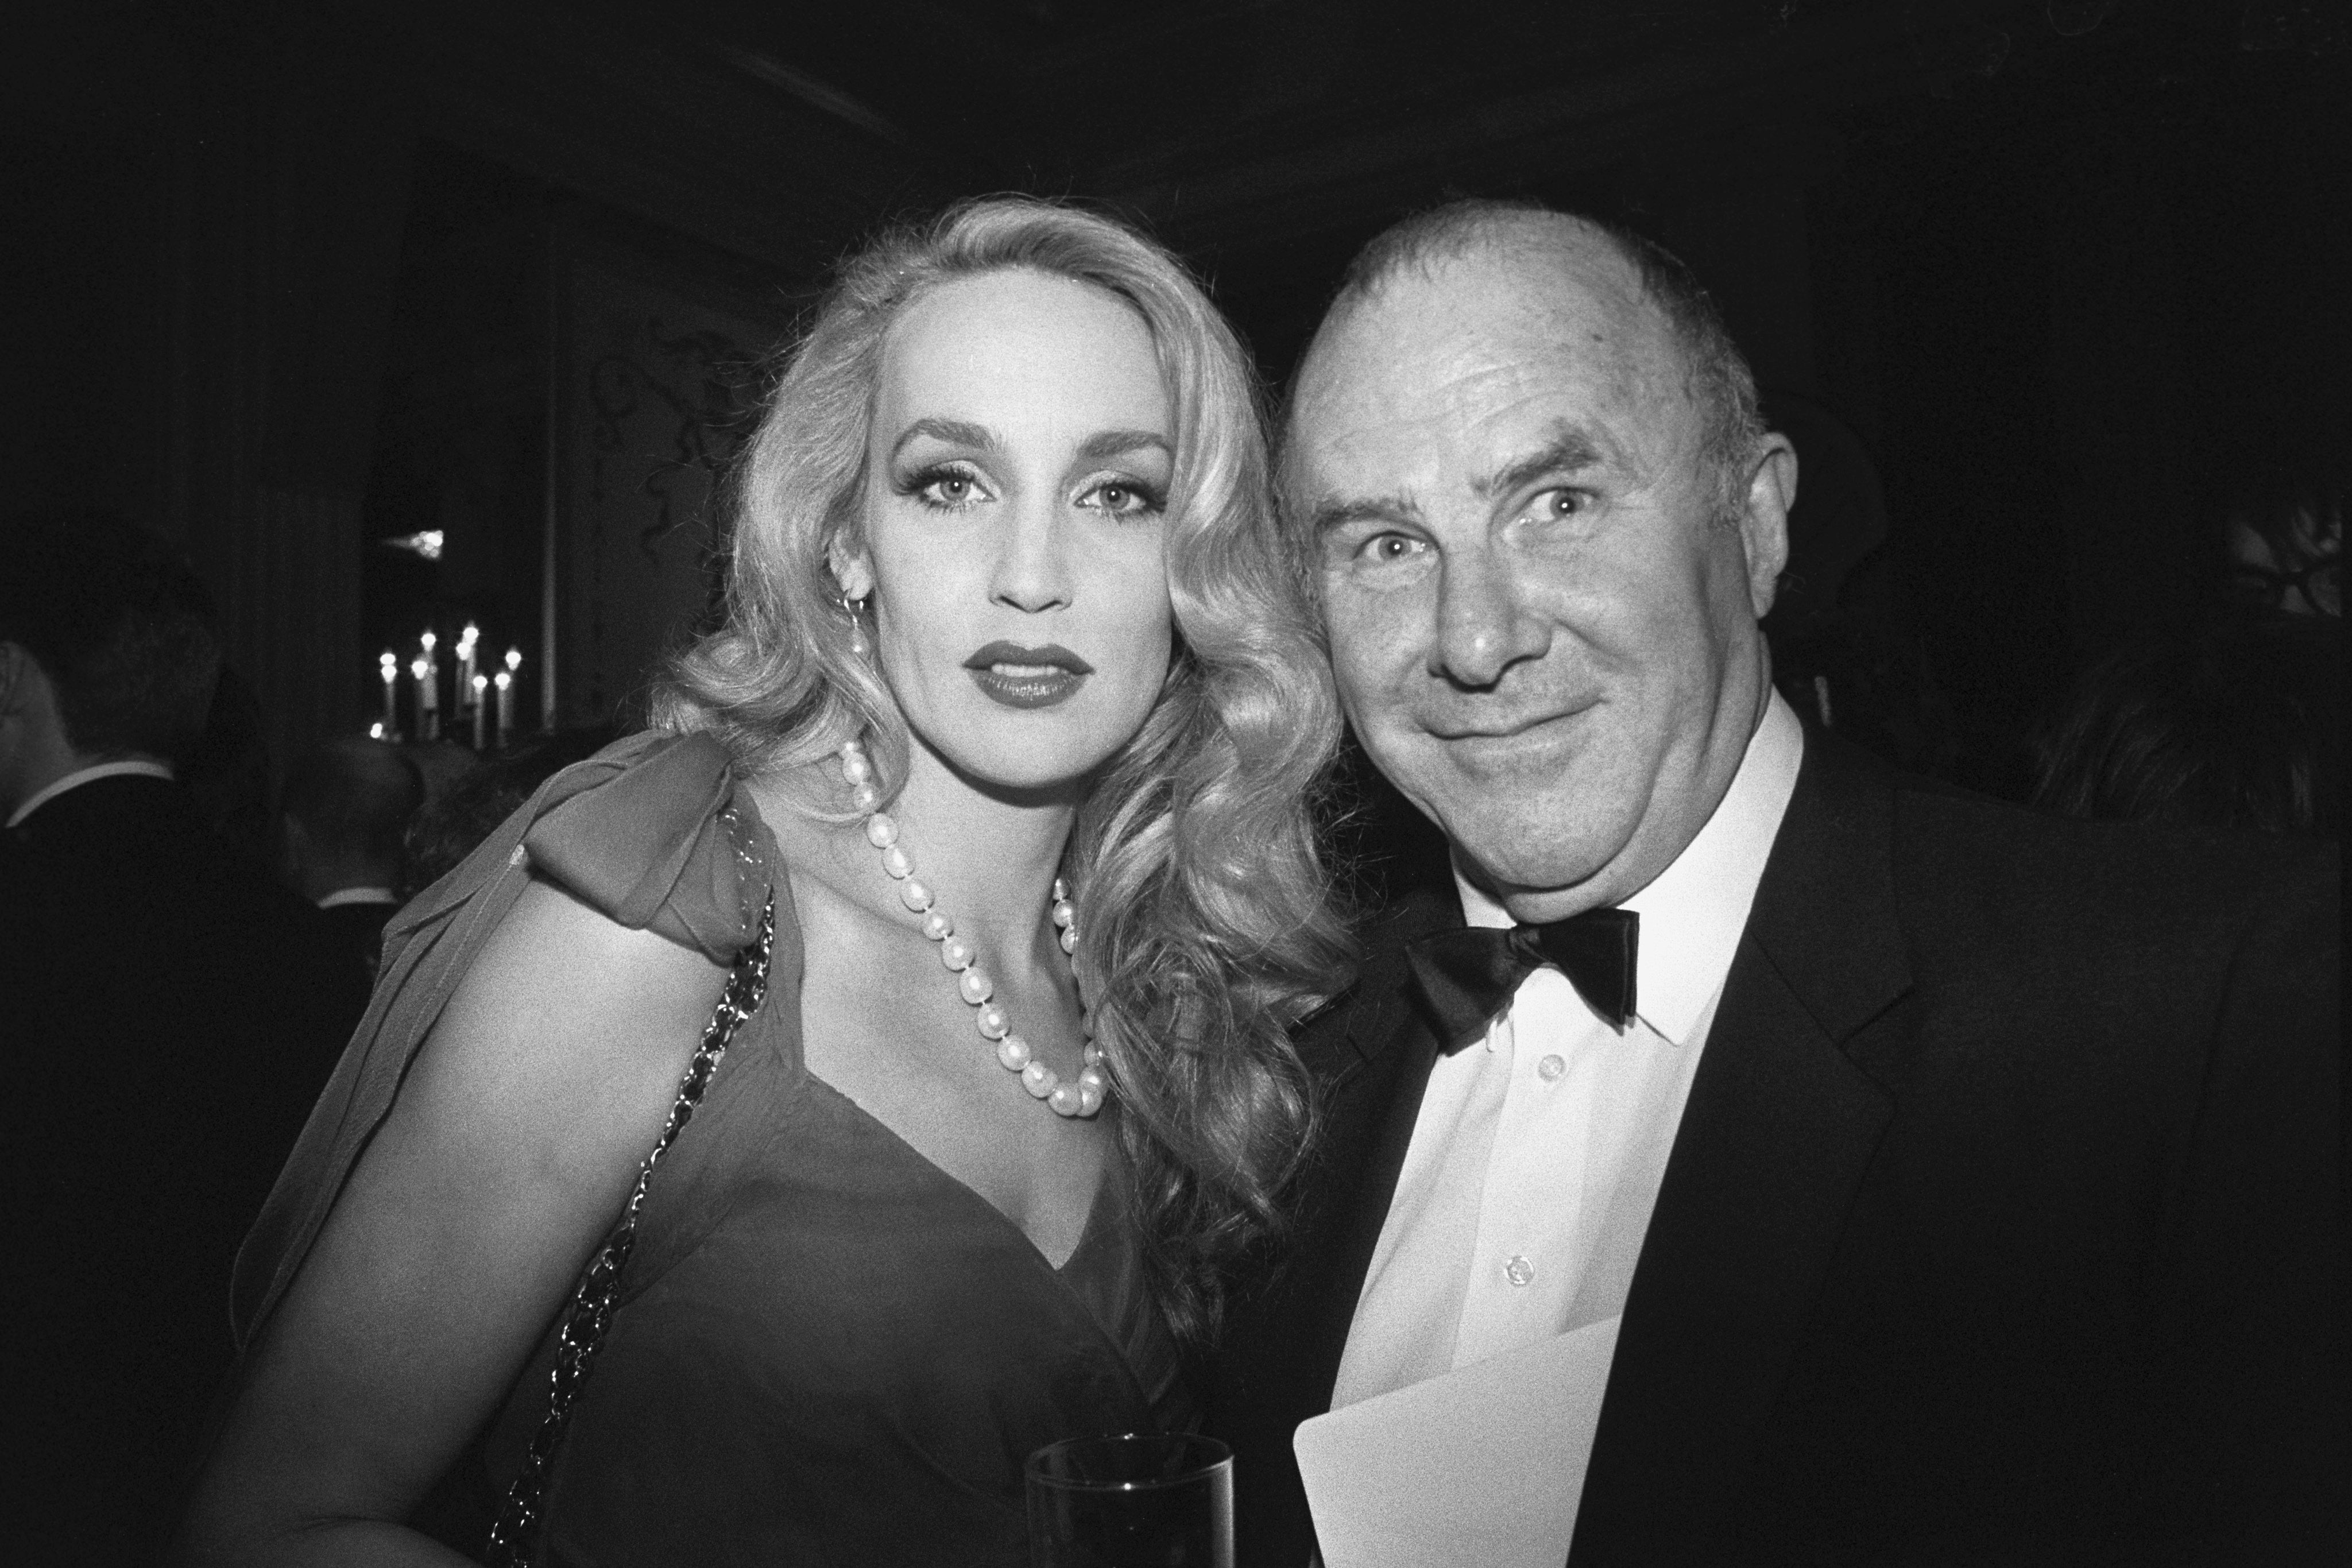 Model Jerry Hall and television chat show host Clive James